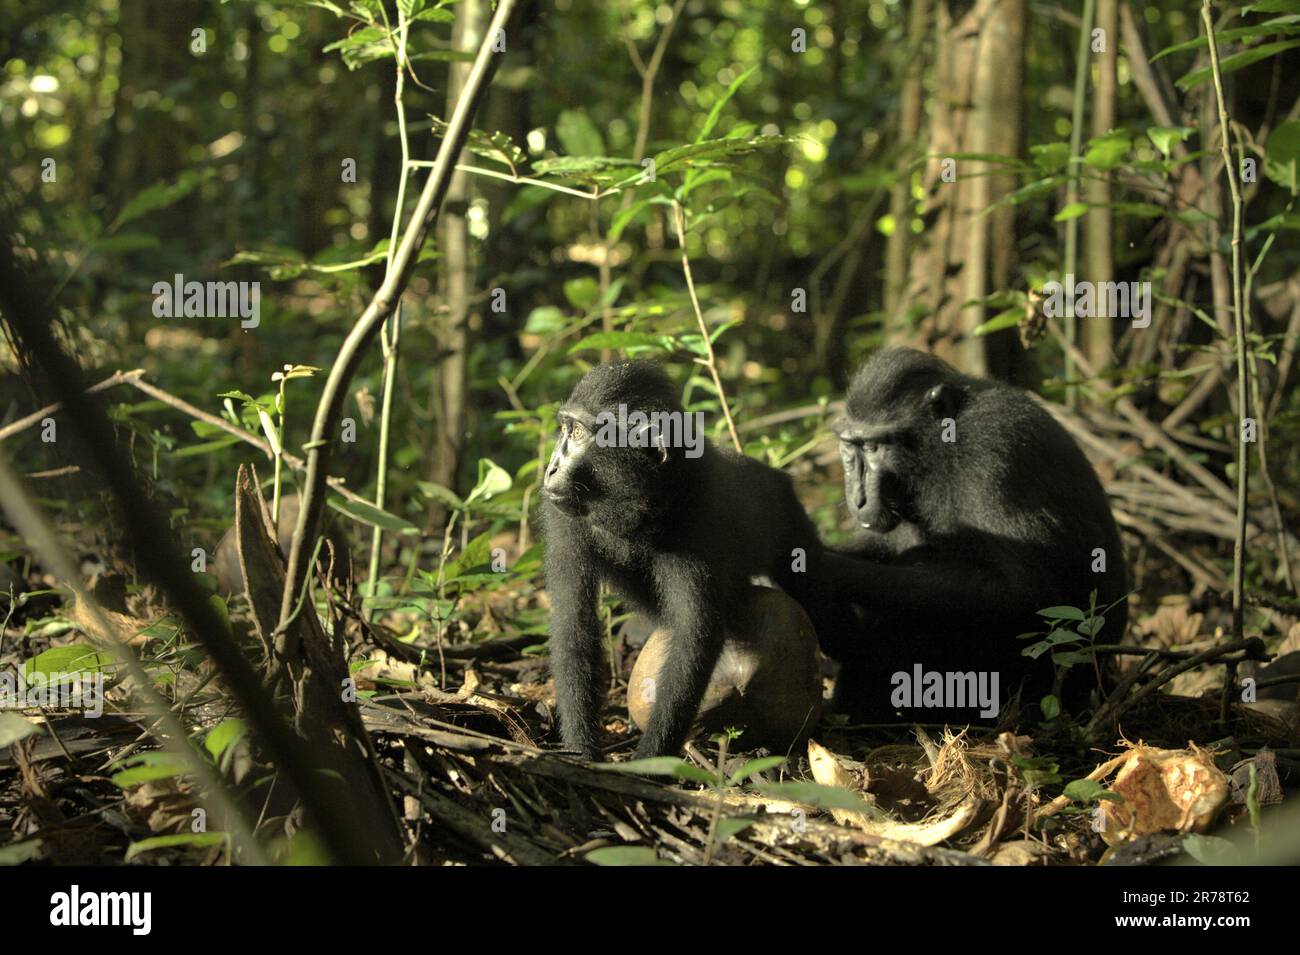 A young crested macaque (Macaca nigra) is being groomed by an older individual in Tangkoko forest, North Sulawesi, Indonesia. Climate change may reduce the habitat suitability and geographic distribution of primate species, according to scientists. Stock Photo